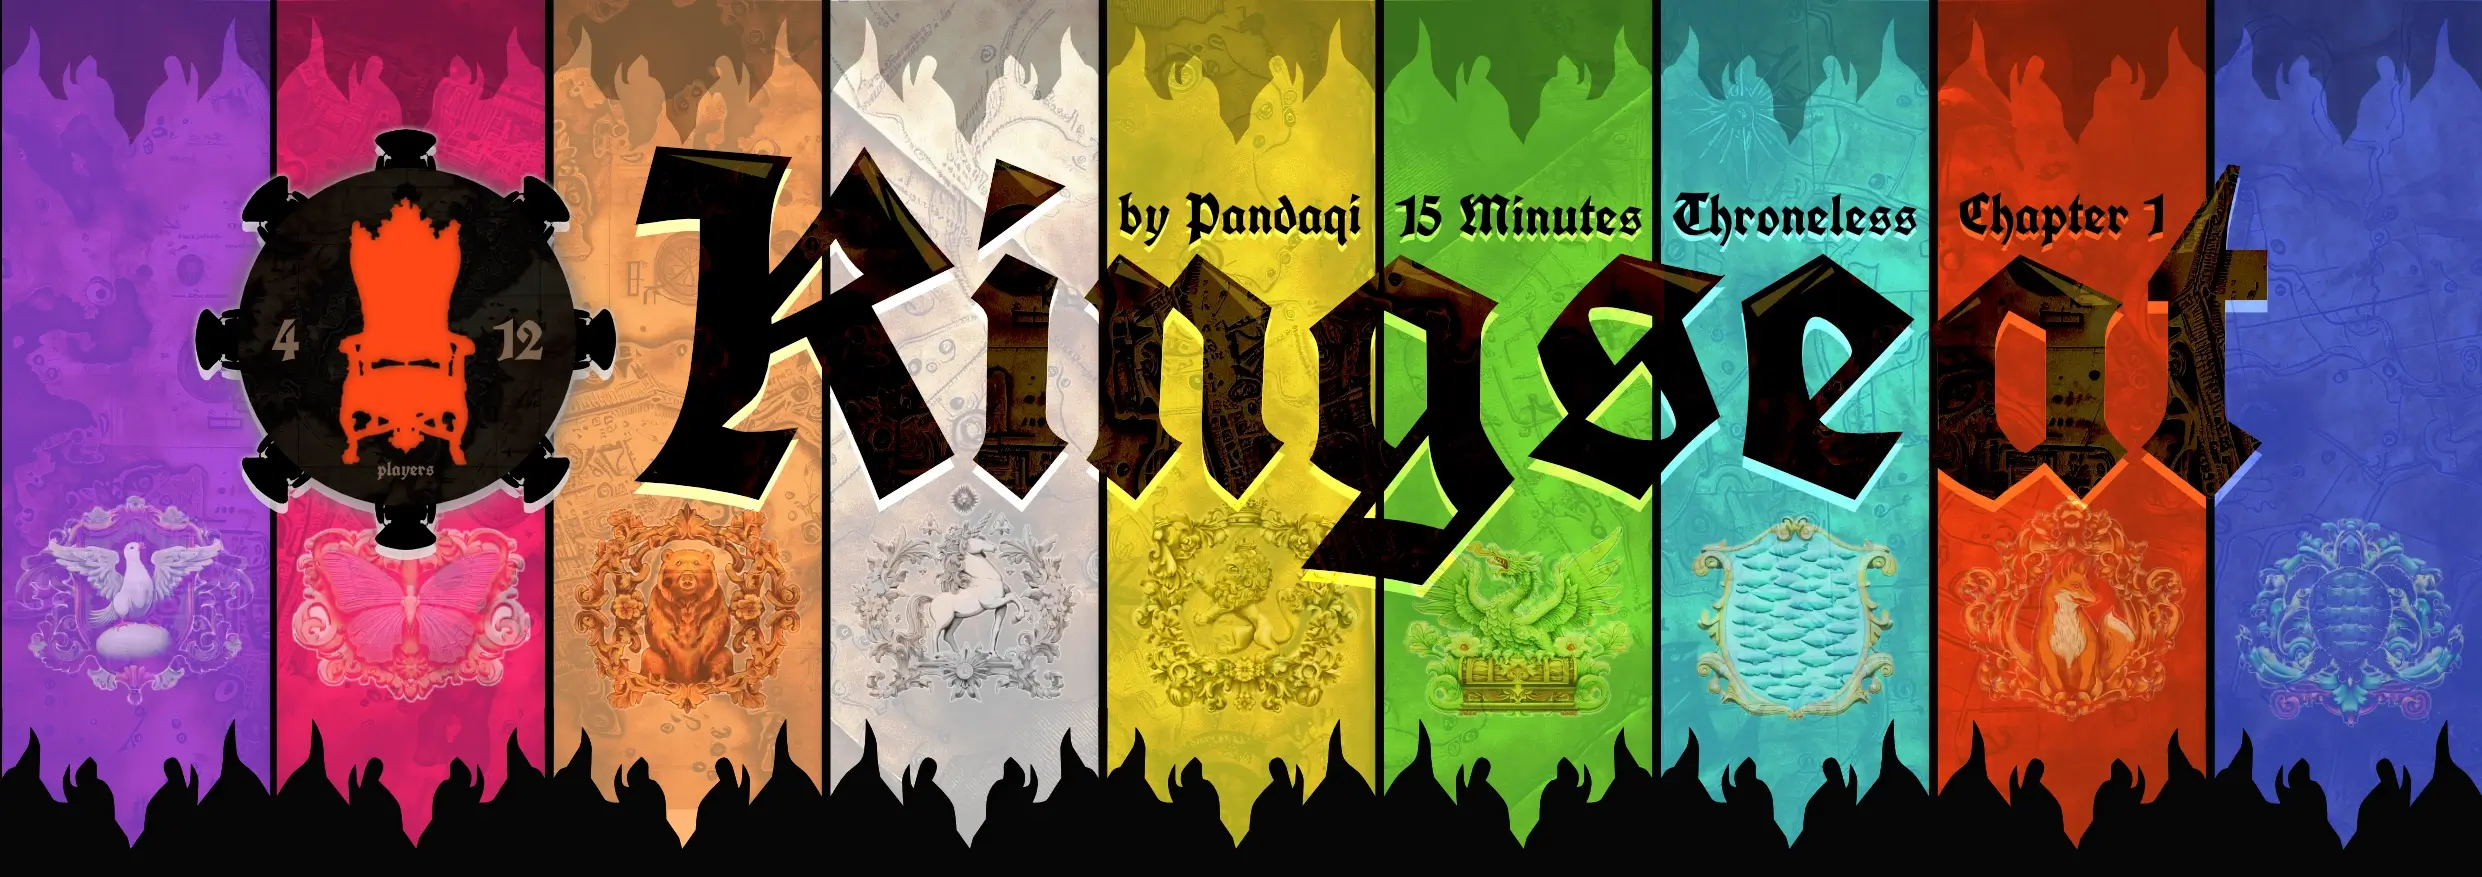 Thumbnail / Header for article: Kingseat